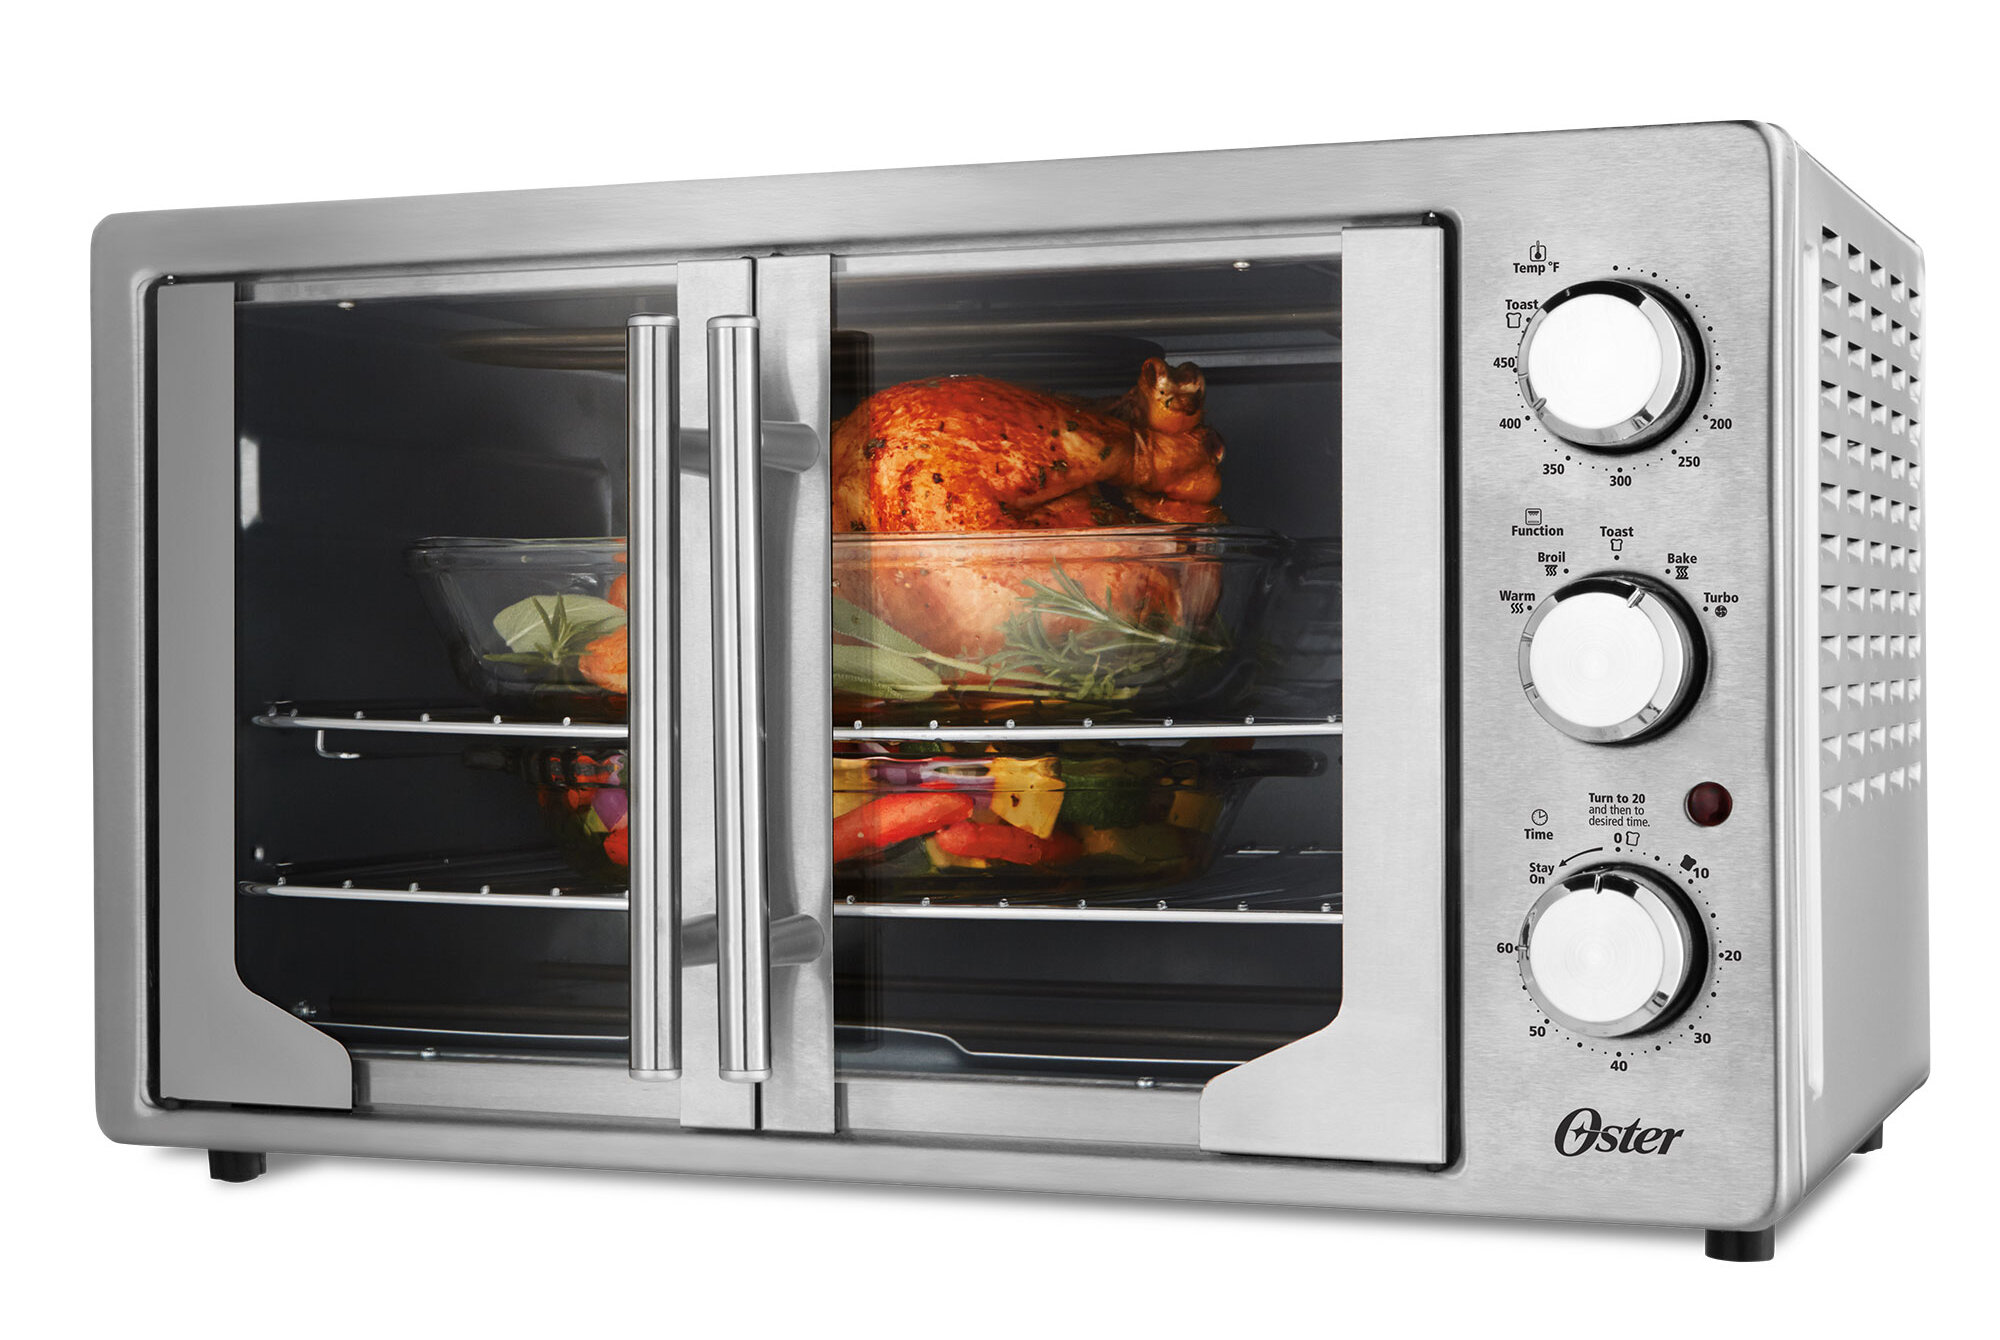 Oster Convection Toaster Oven | I Decoration Ideas